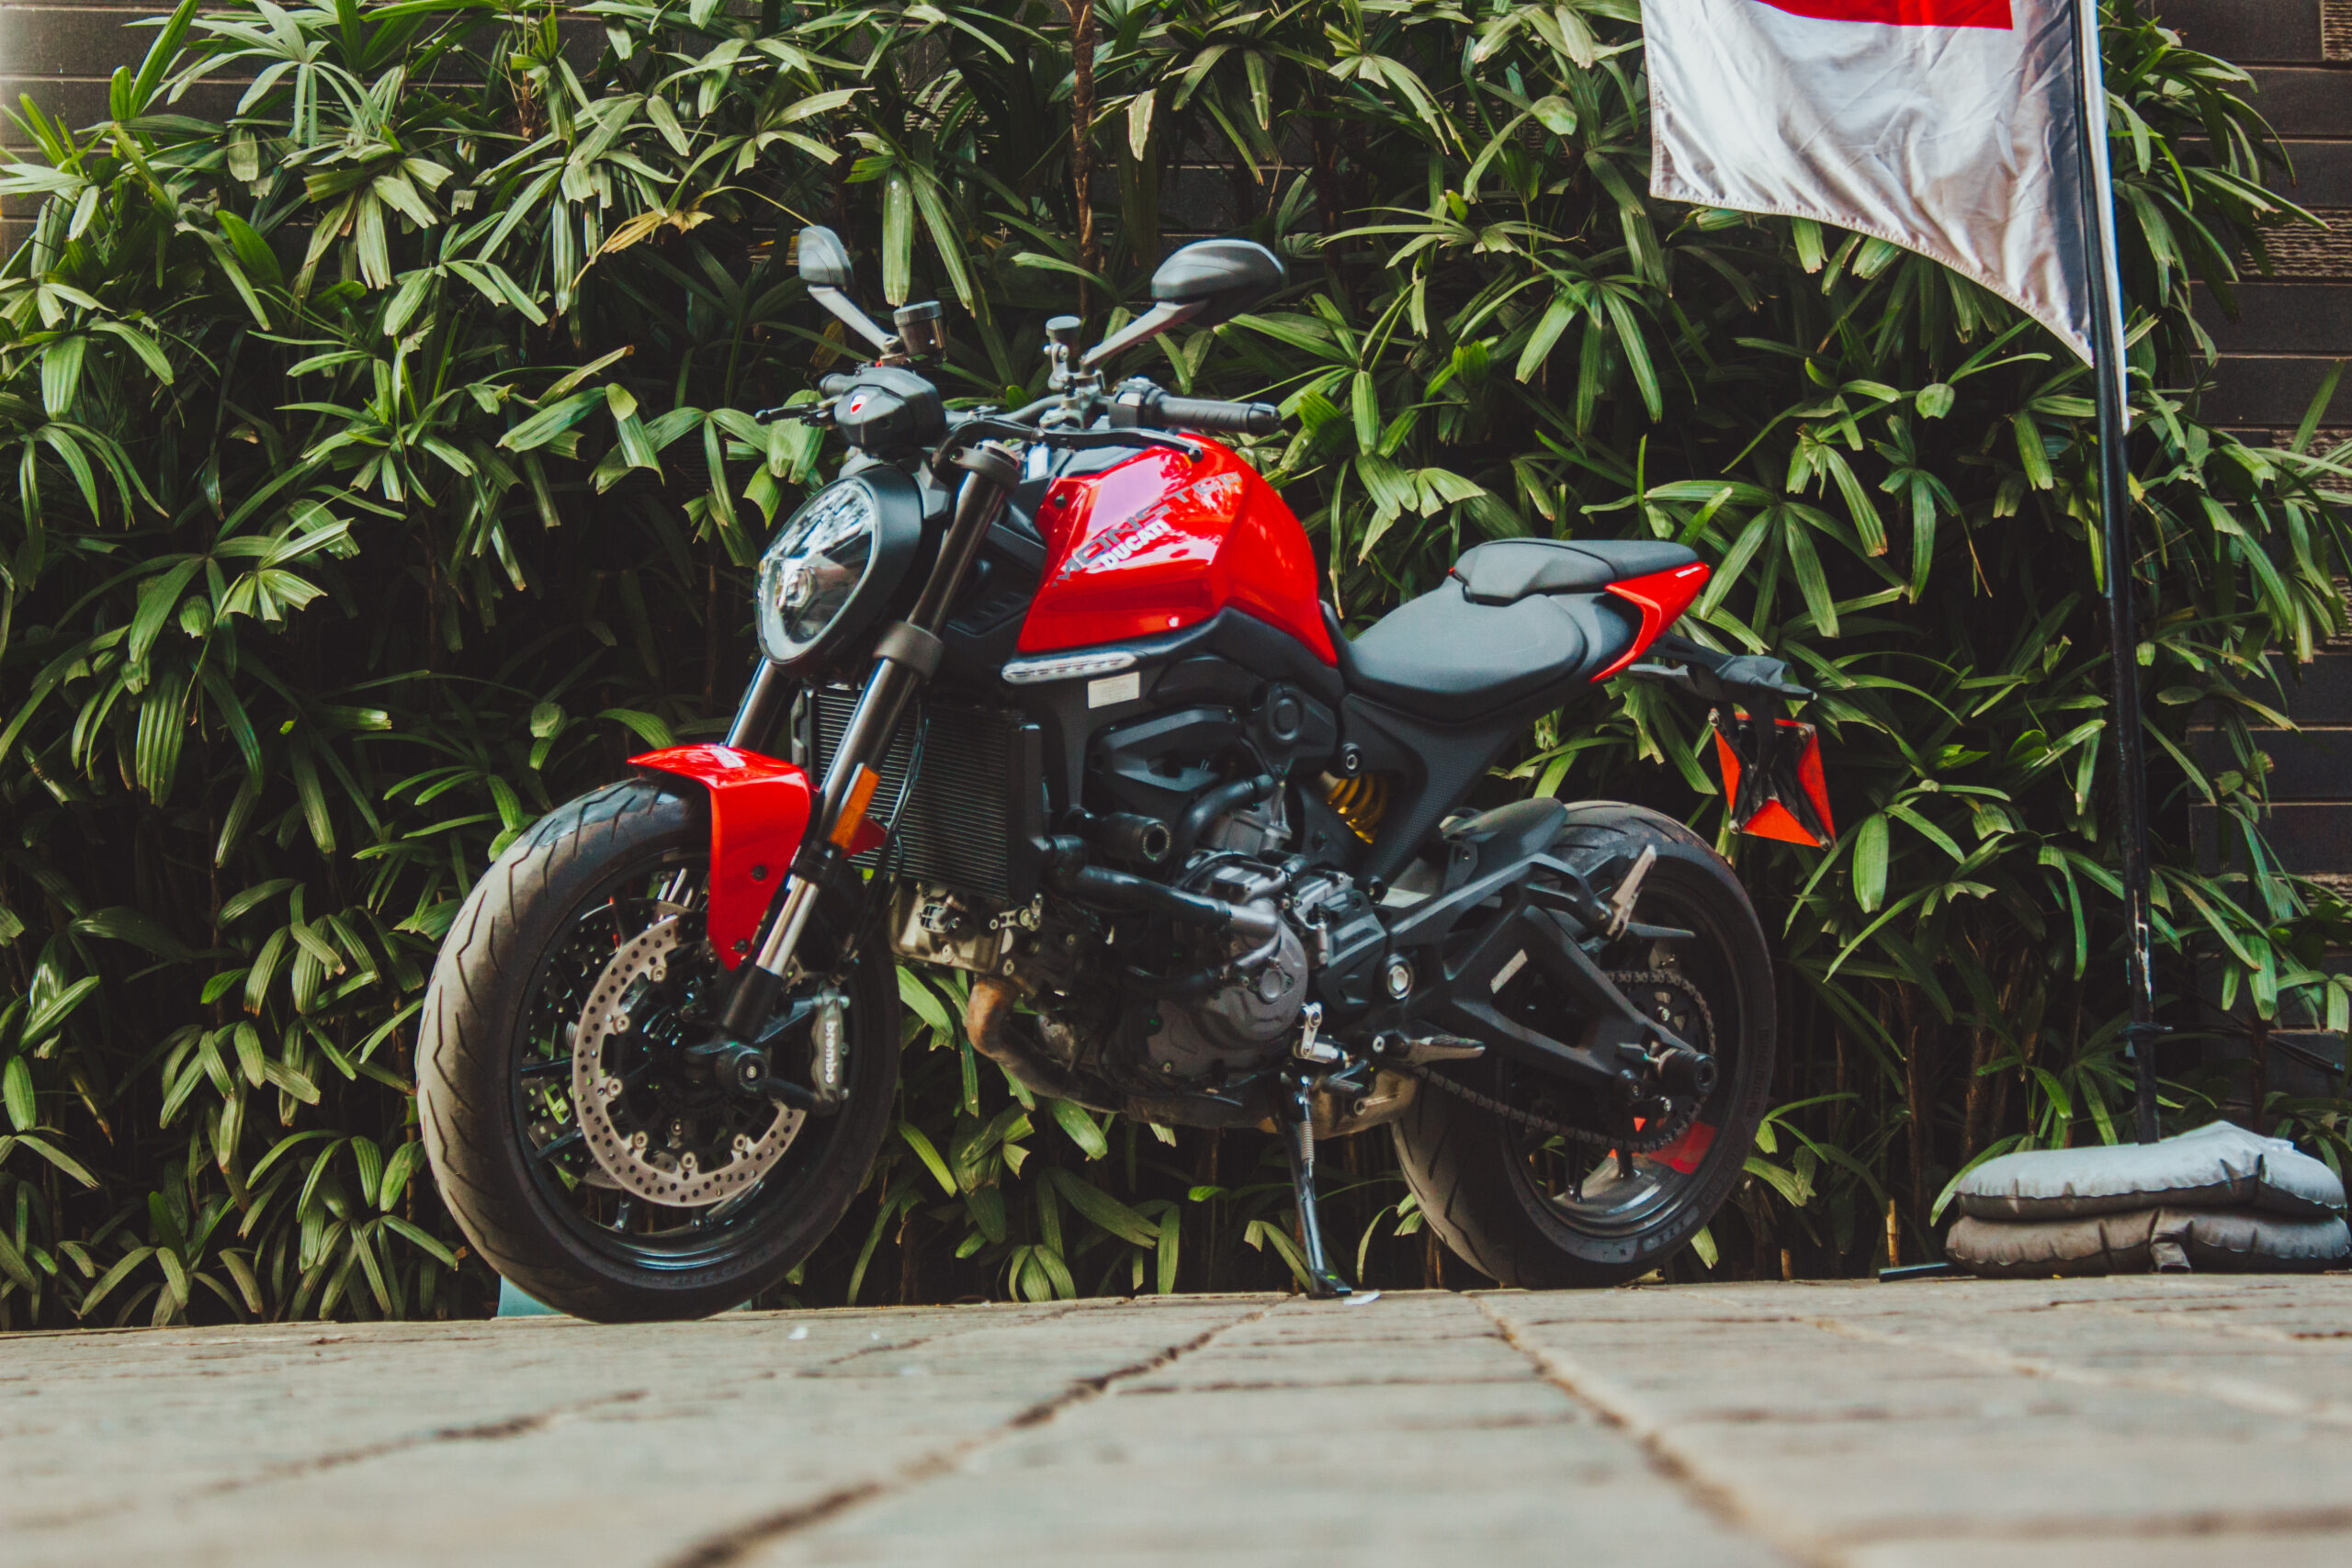 Breaking traditions: Does the new Ducati Monster justify its name?